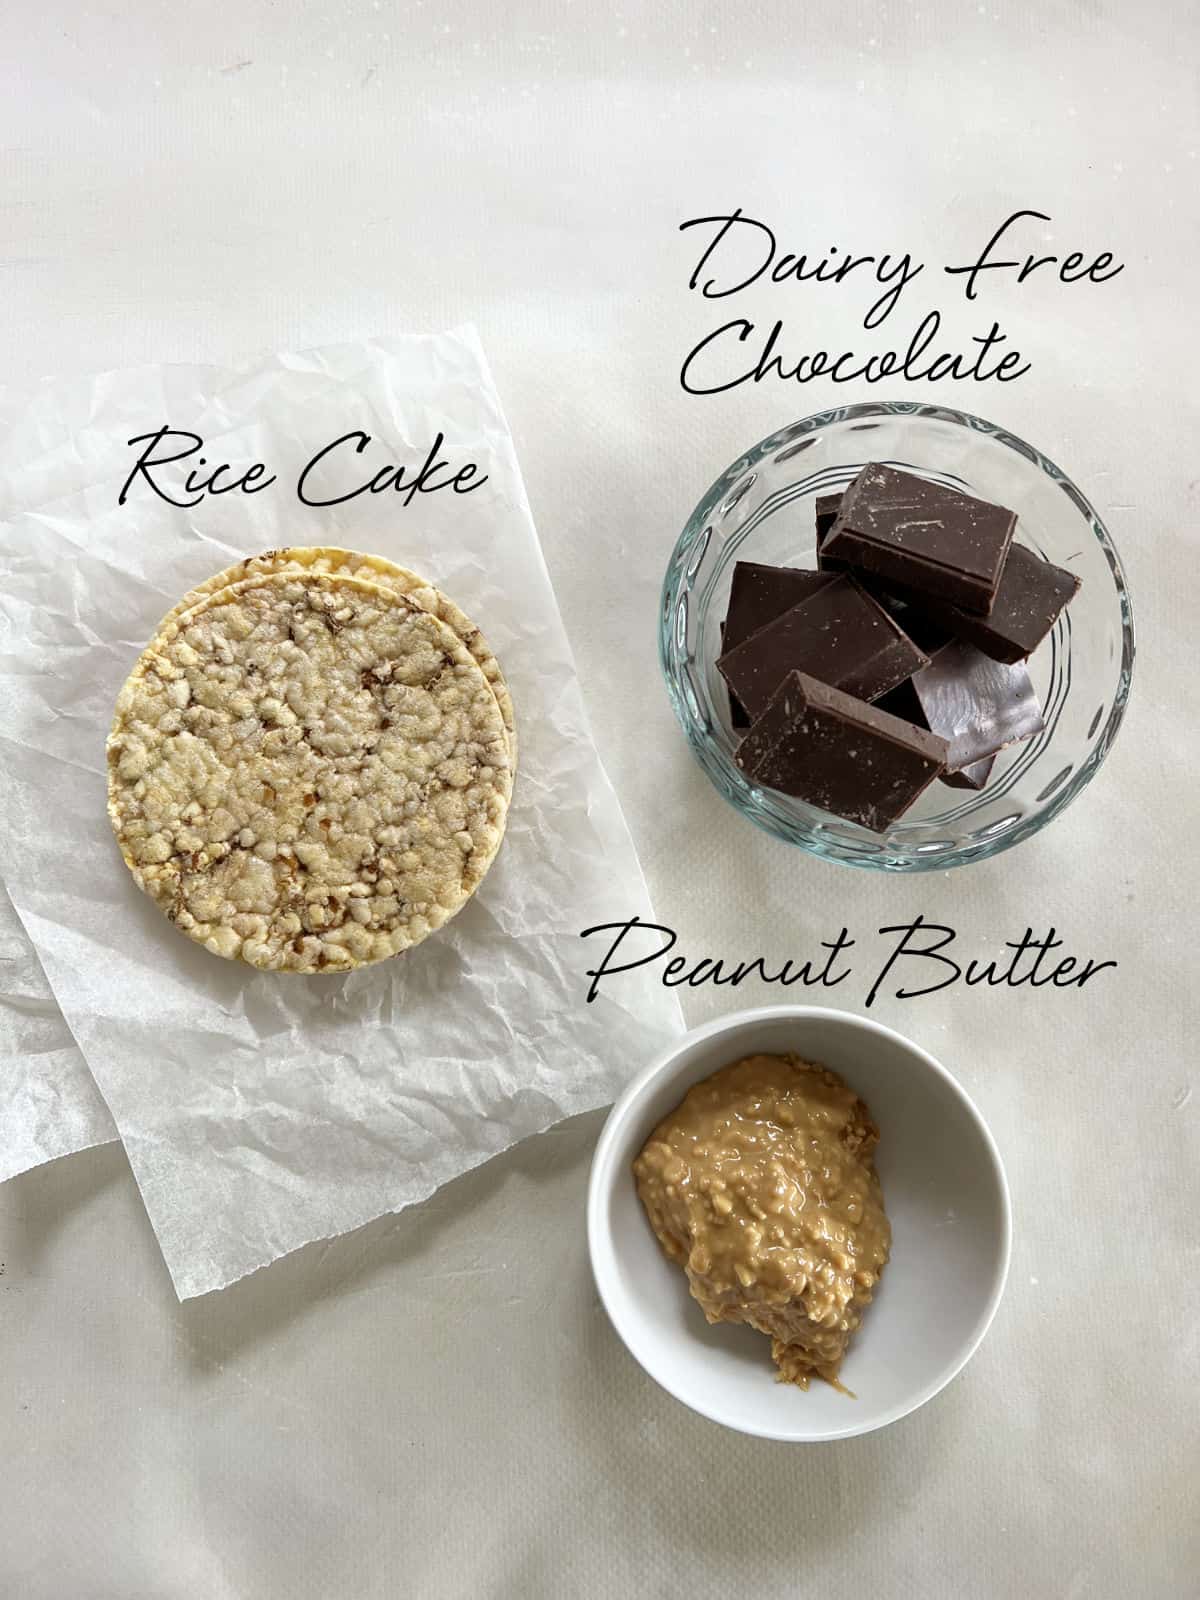 chocolate, rice cake and peanut butter in bowls